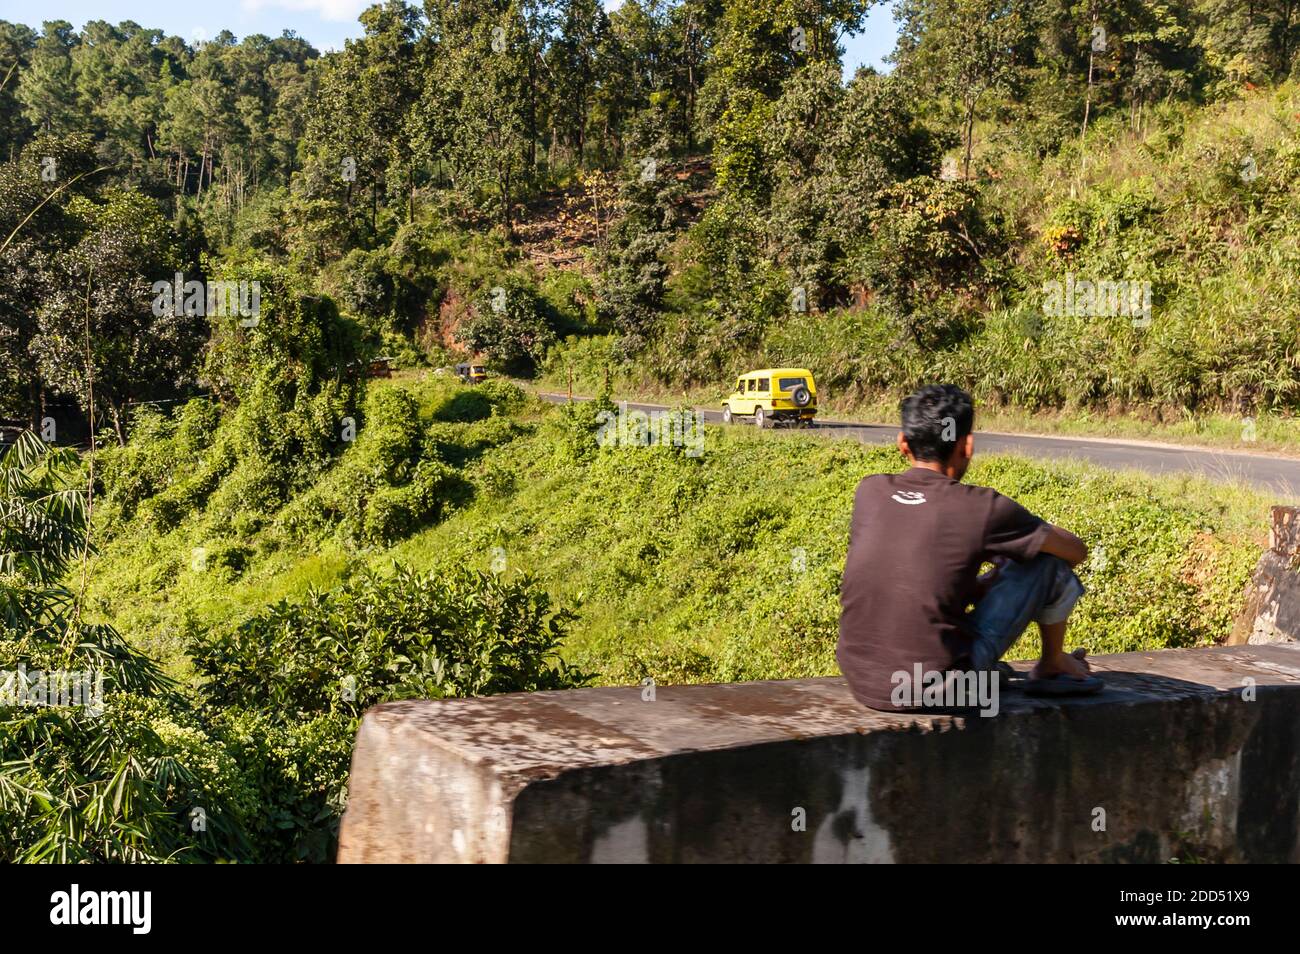 A man sits on the protective guarding next to a highway watching the traffic drive by him. A Tata Sumo SUV is visible in the picture. Stock Photo